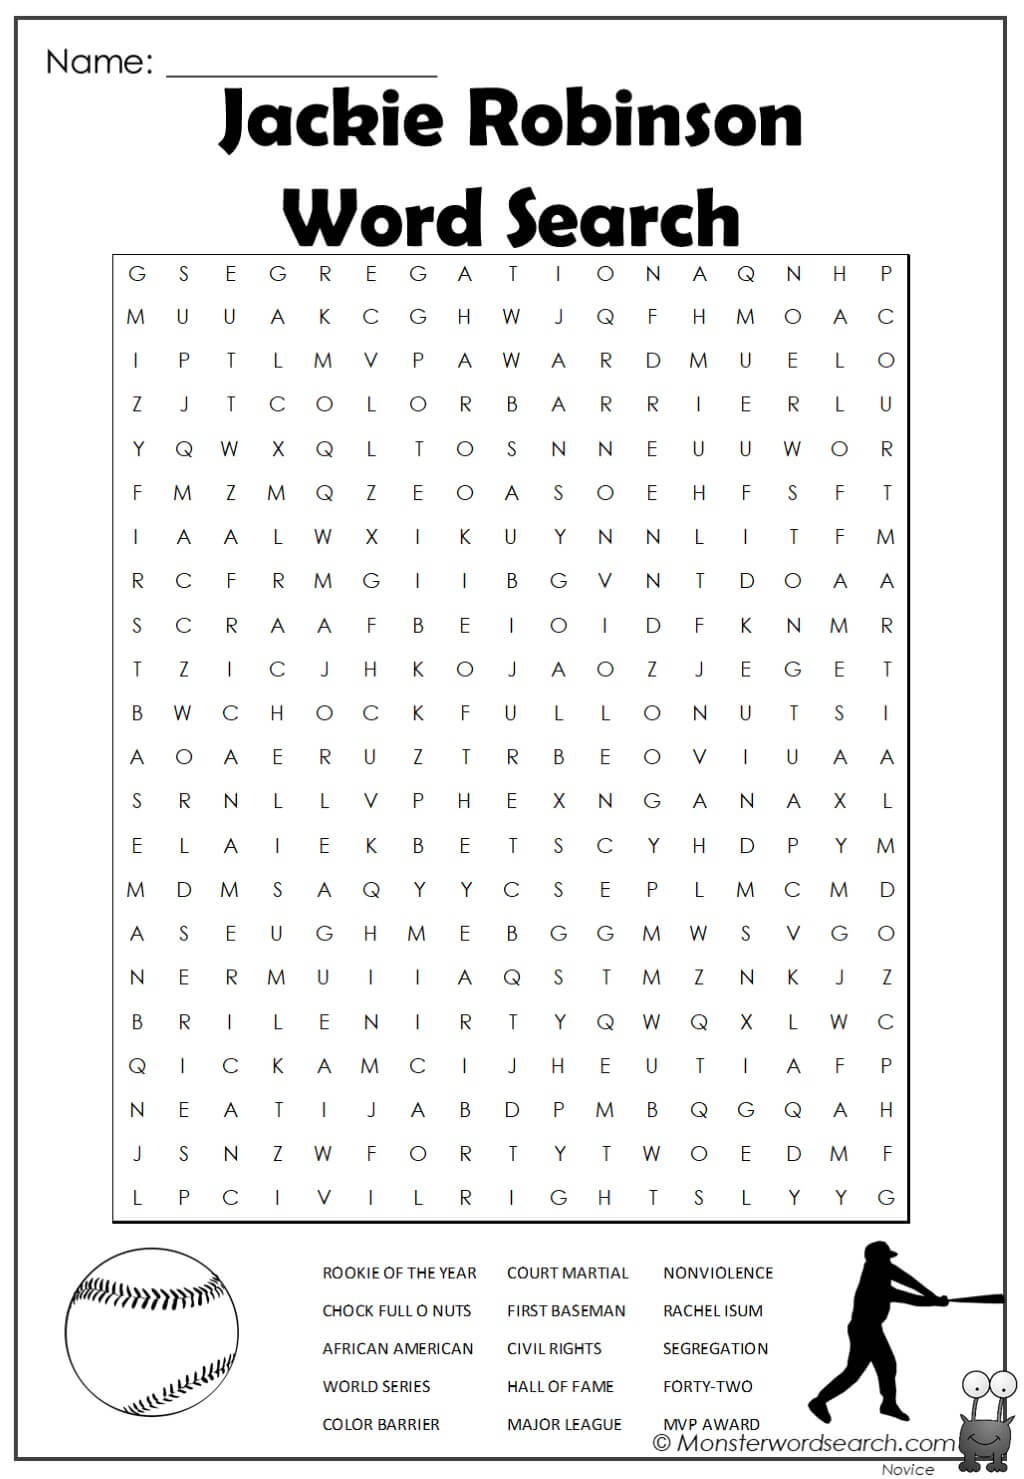 jackie-robinson-word-search-monster-word-search